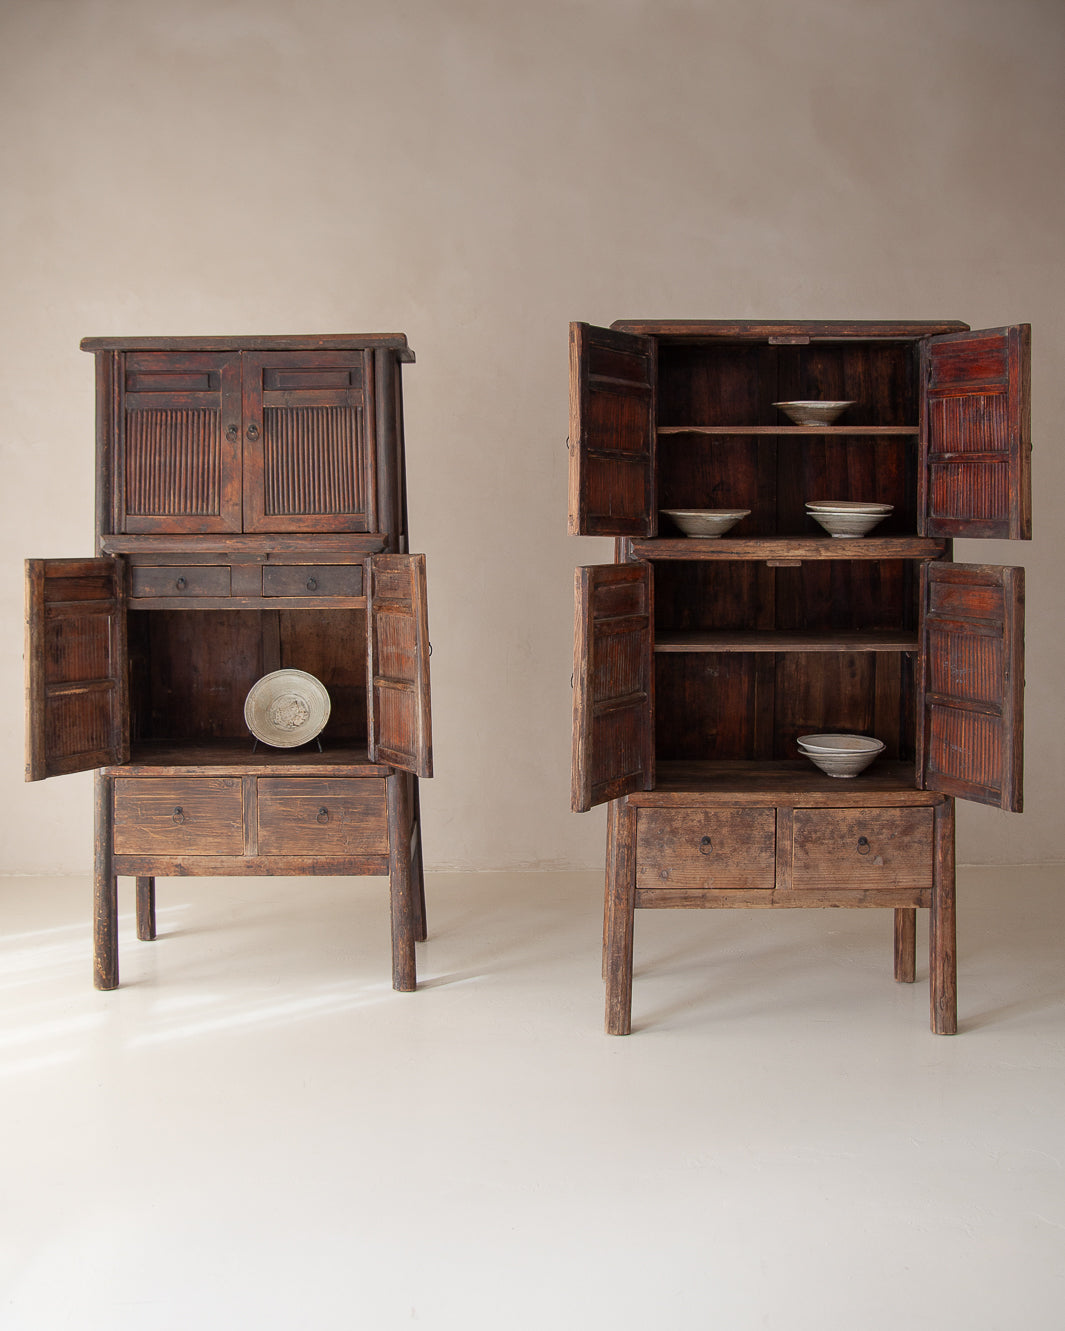 Cabinet Chinois 19th century